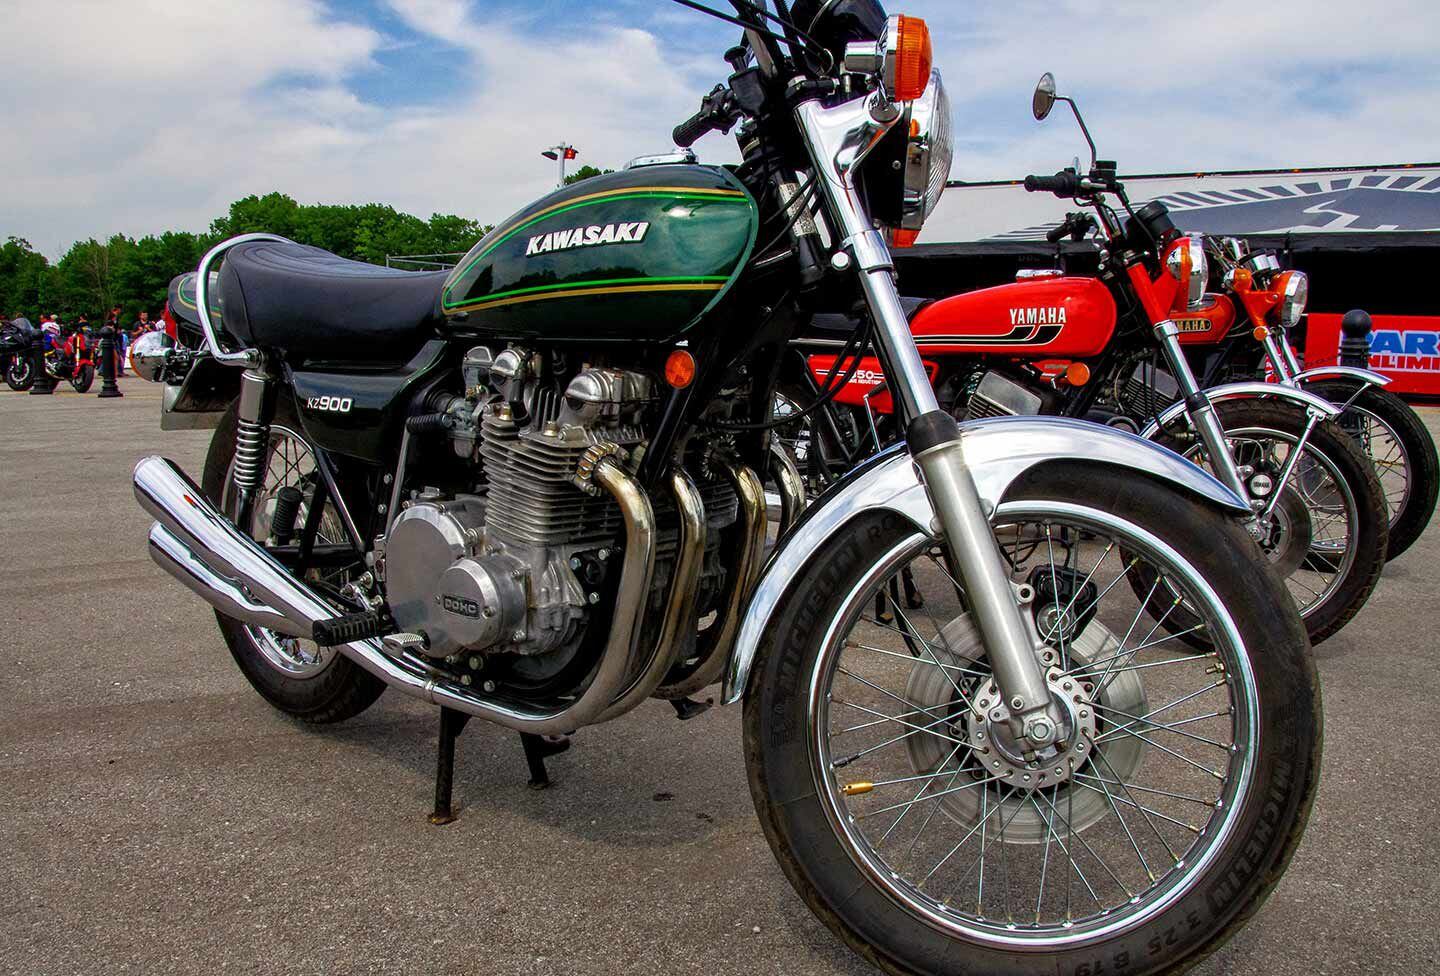 A beautiful Kawasaki KZ900 sums up everything wonderful about the 1970s, in front of a Yamaha RD350 and Yamaha R5.